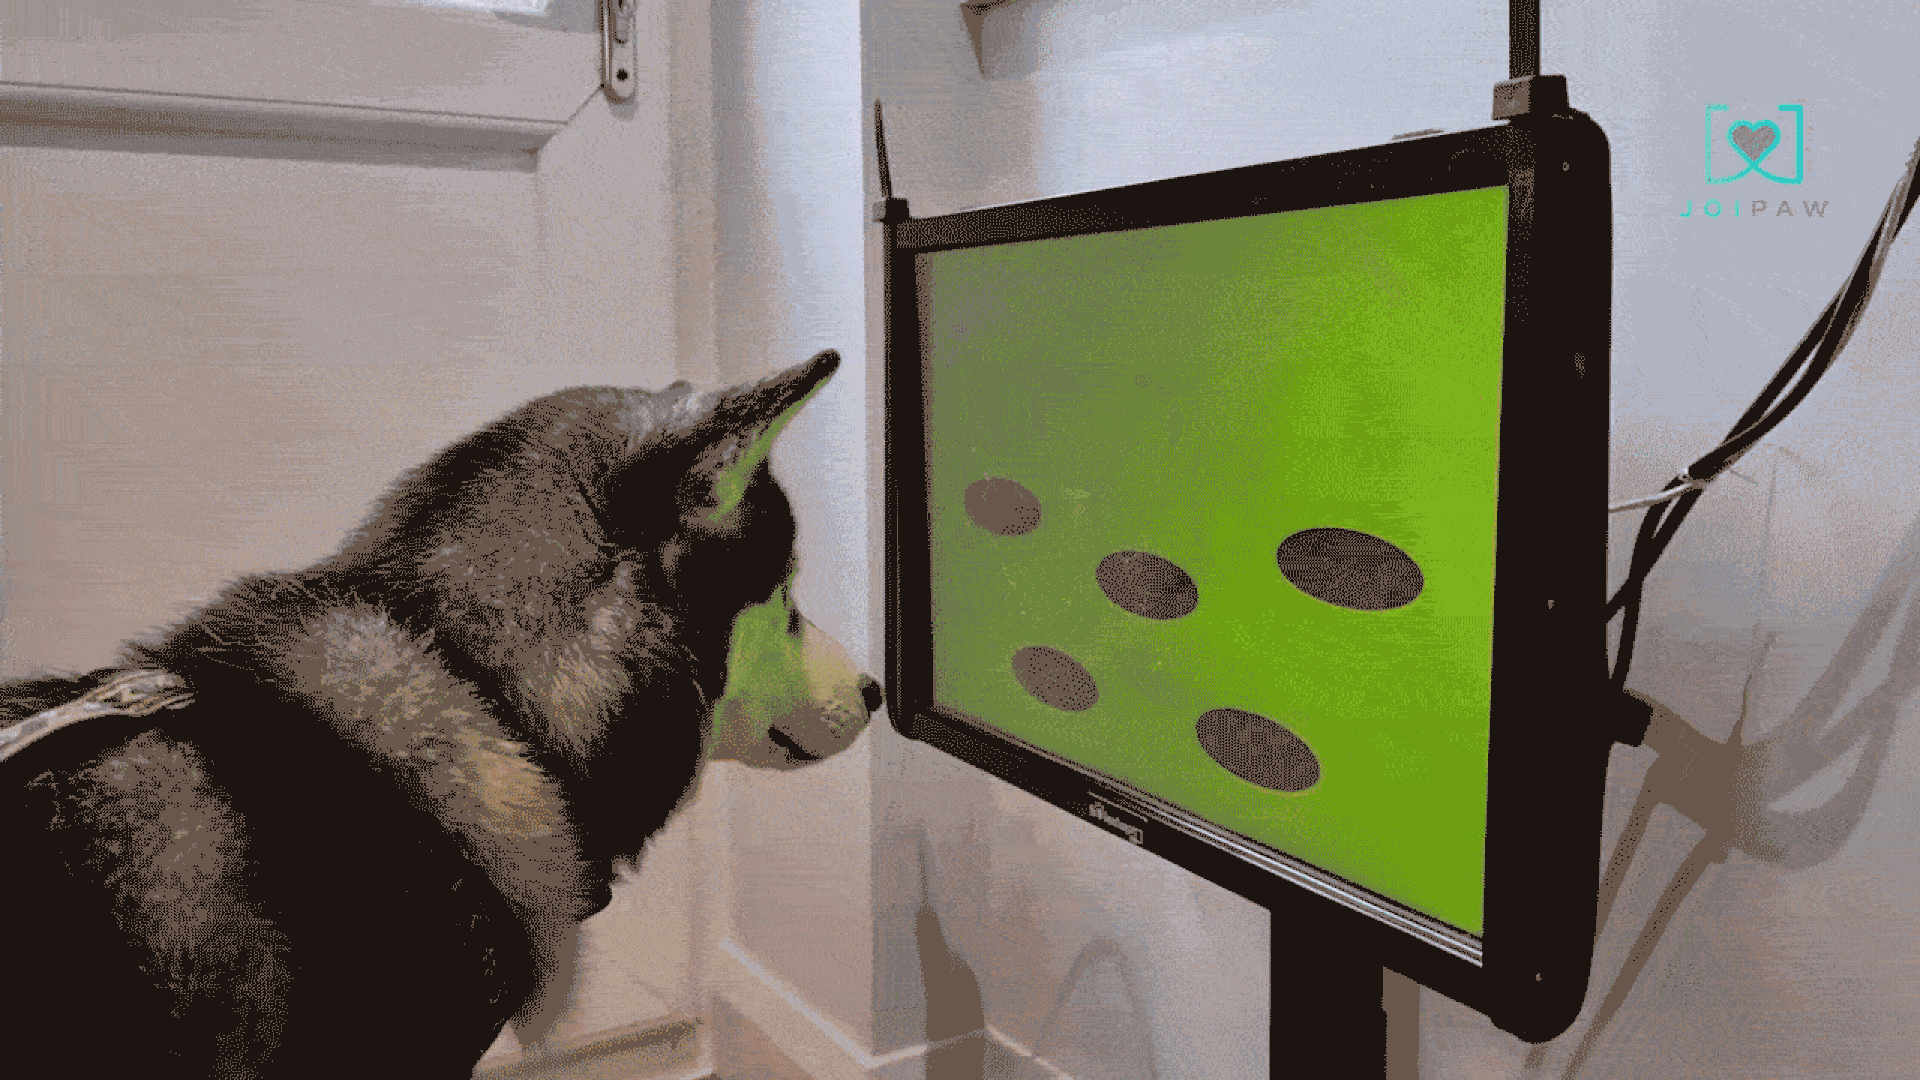 Animated GIF showing a dog tapping a touch screen with its nose, as a virtual hedgehog pops up on the screen